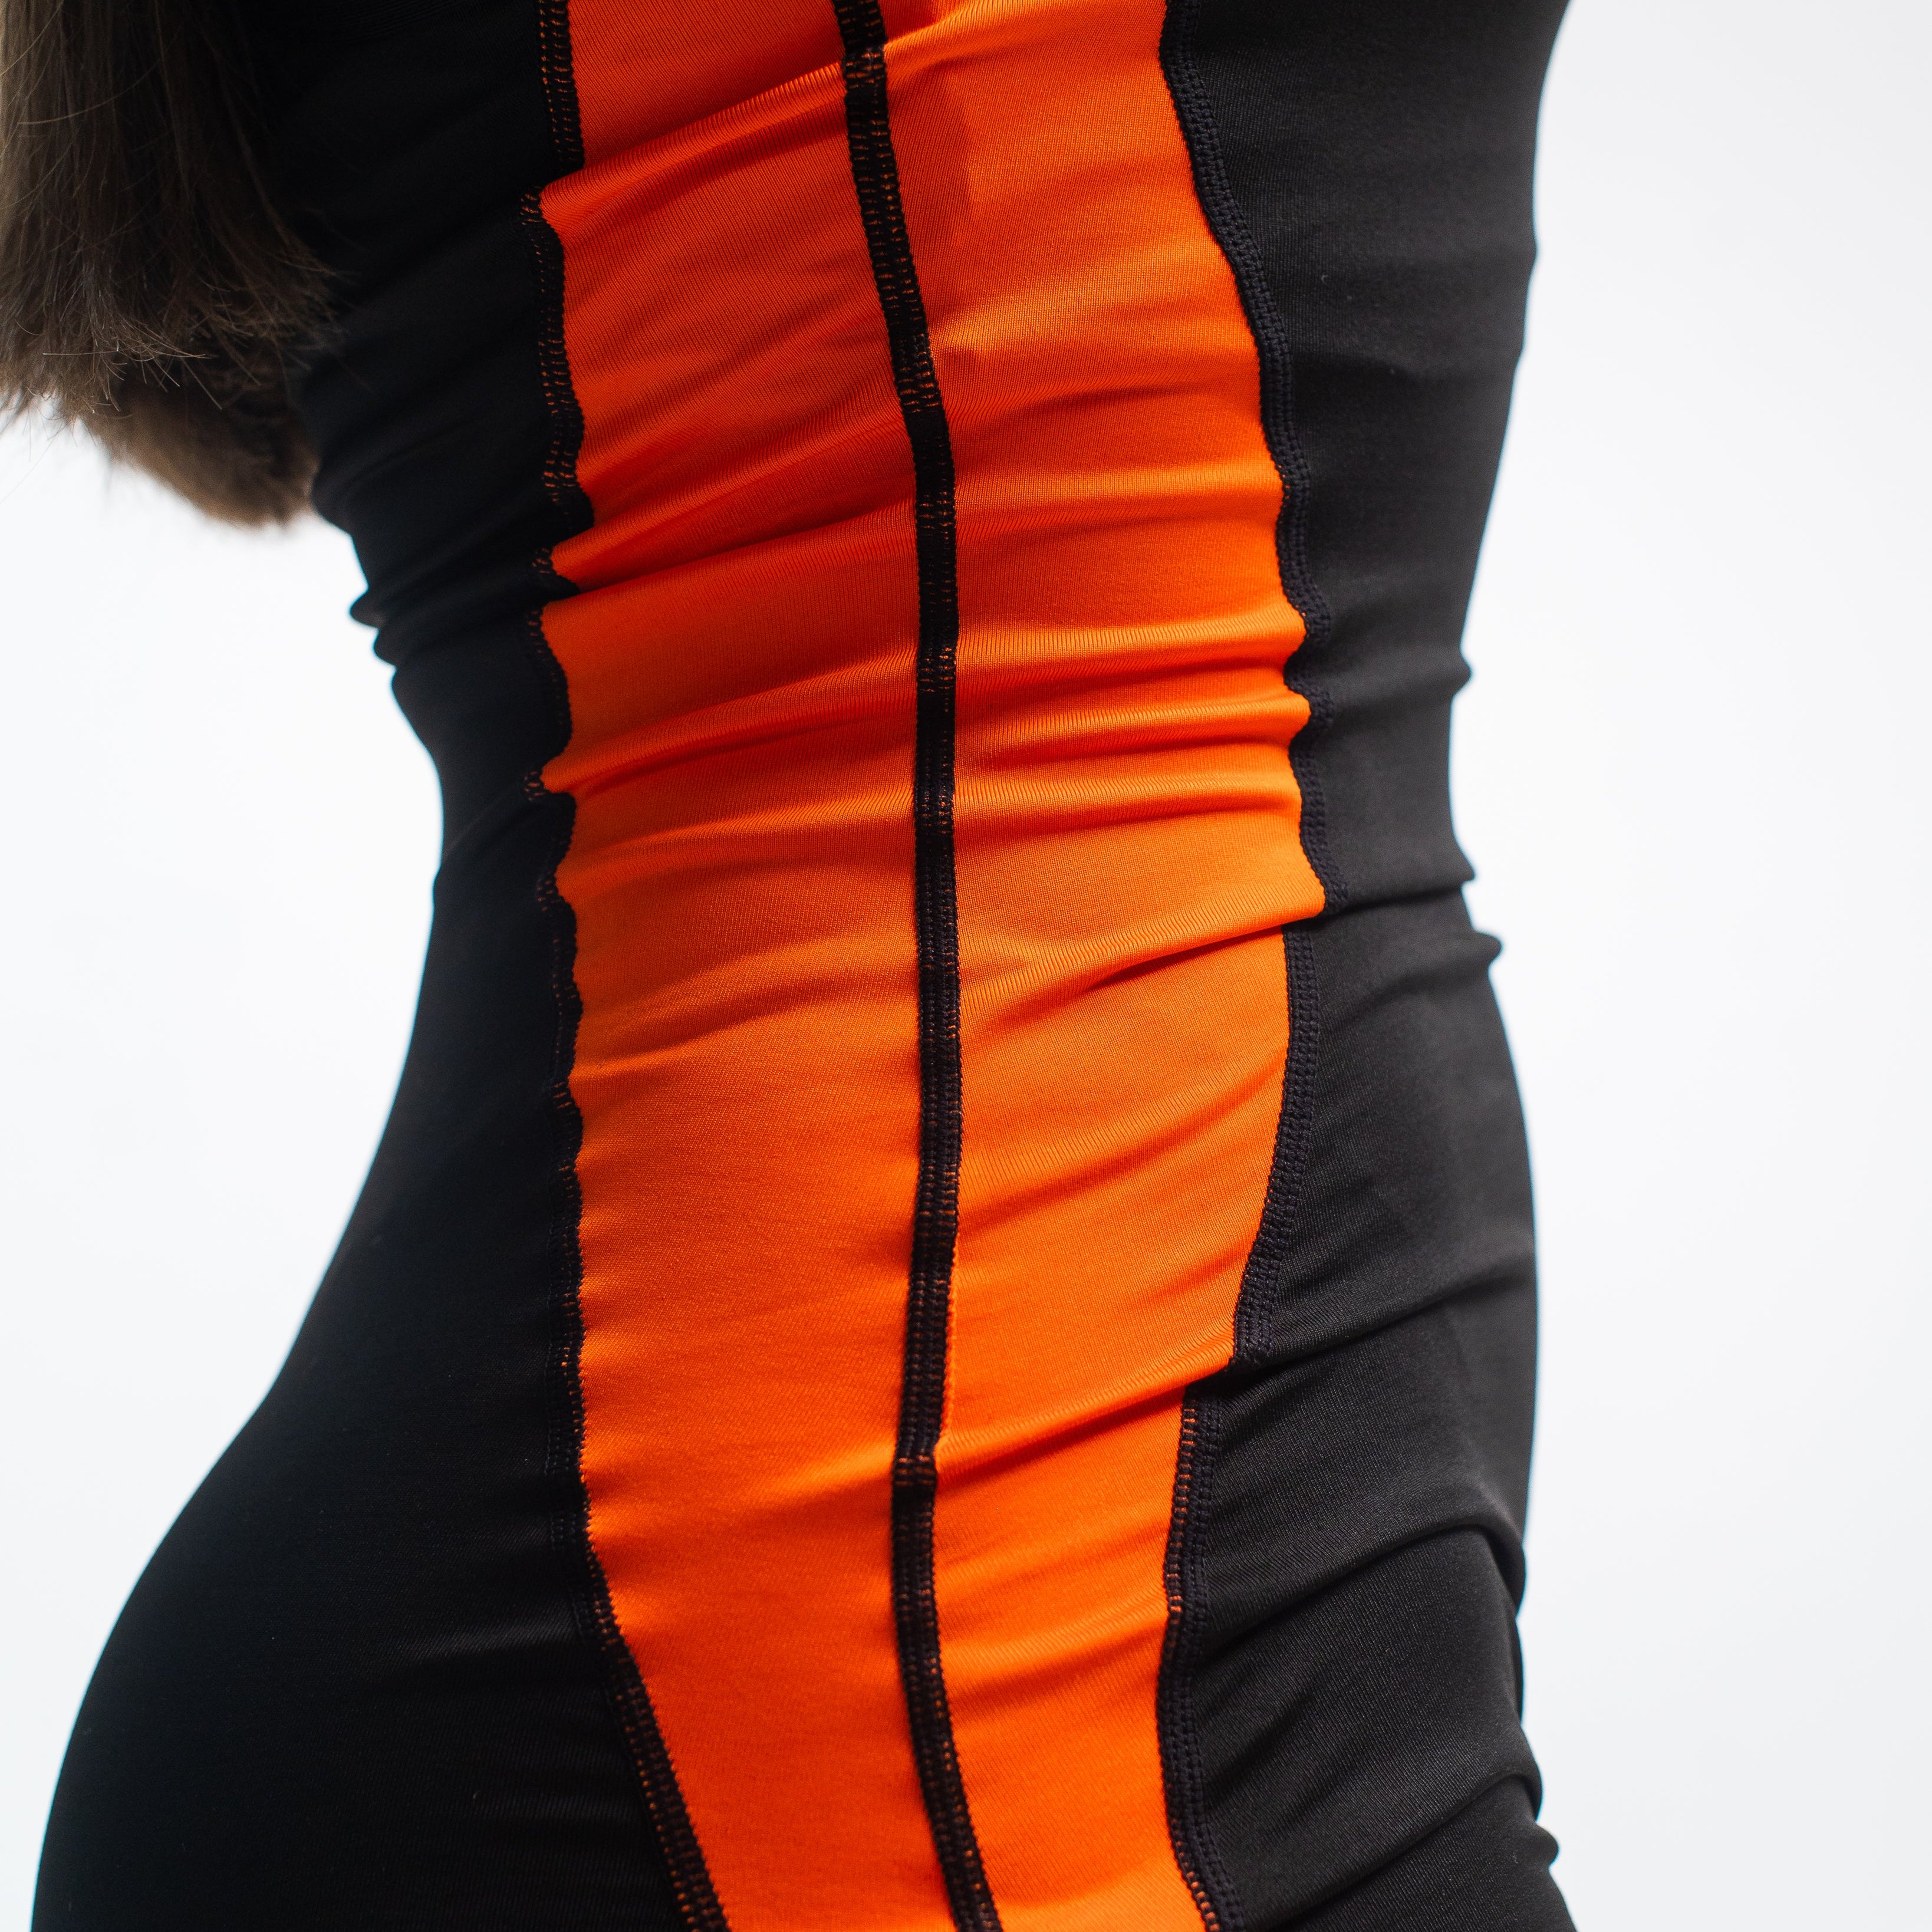 A7 IPF Approved Blaze Luno singlet features extra lat mobility, side panel stitching to guide the squat depth level and curved panel design for a slimming look. The Women's cut singlet features a tapered waist and additional quad room. The IPF Approved Kit includes Luno Powerlifting Singlet, A7 Meet Shirt, A7 Zebra Wrist Wraps, A7 Deadlift Socks, Hourglass Knee Sleeves (Stiff Knee Sleeves and Rigor Mortis Knee Sleeves). All A7 Powerlifting Equipment shipping to UK, Norway, Switzerland and Iceland.